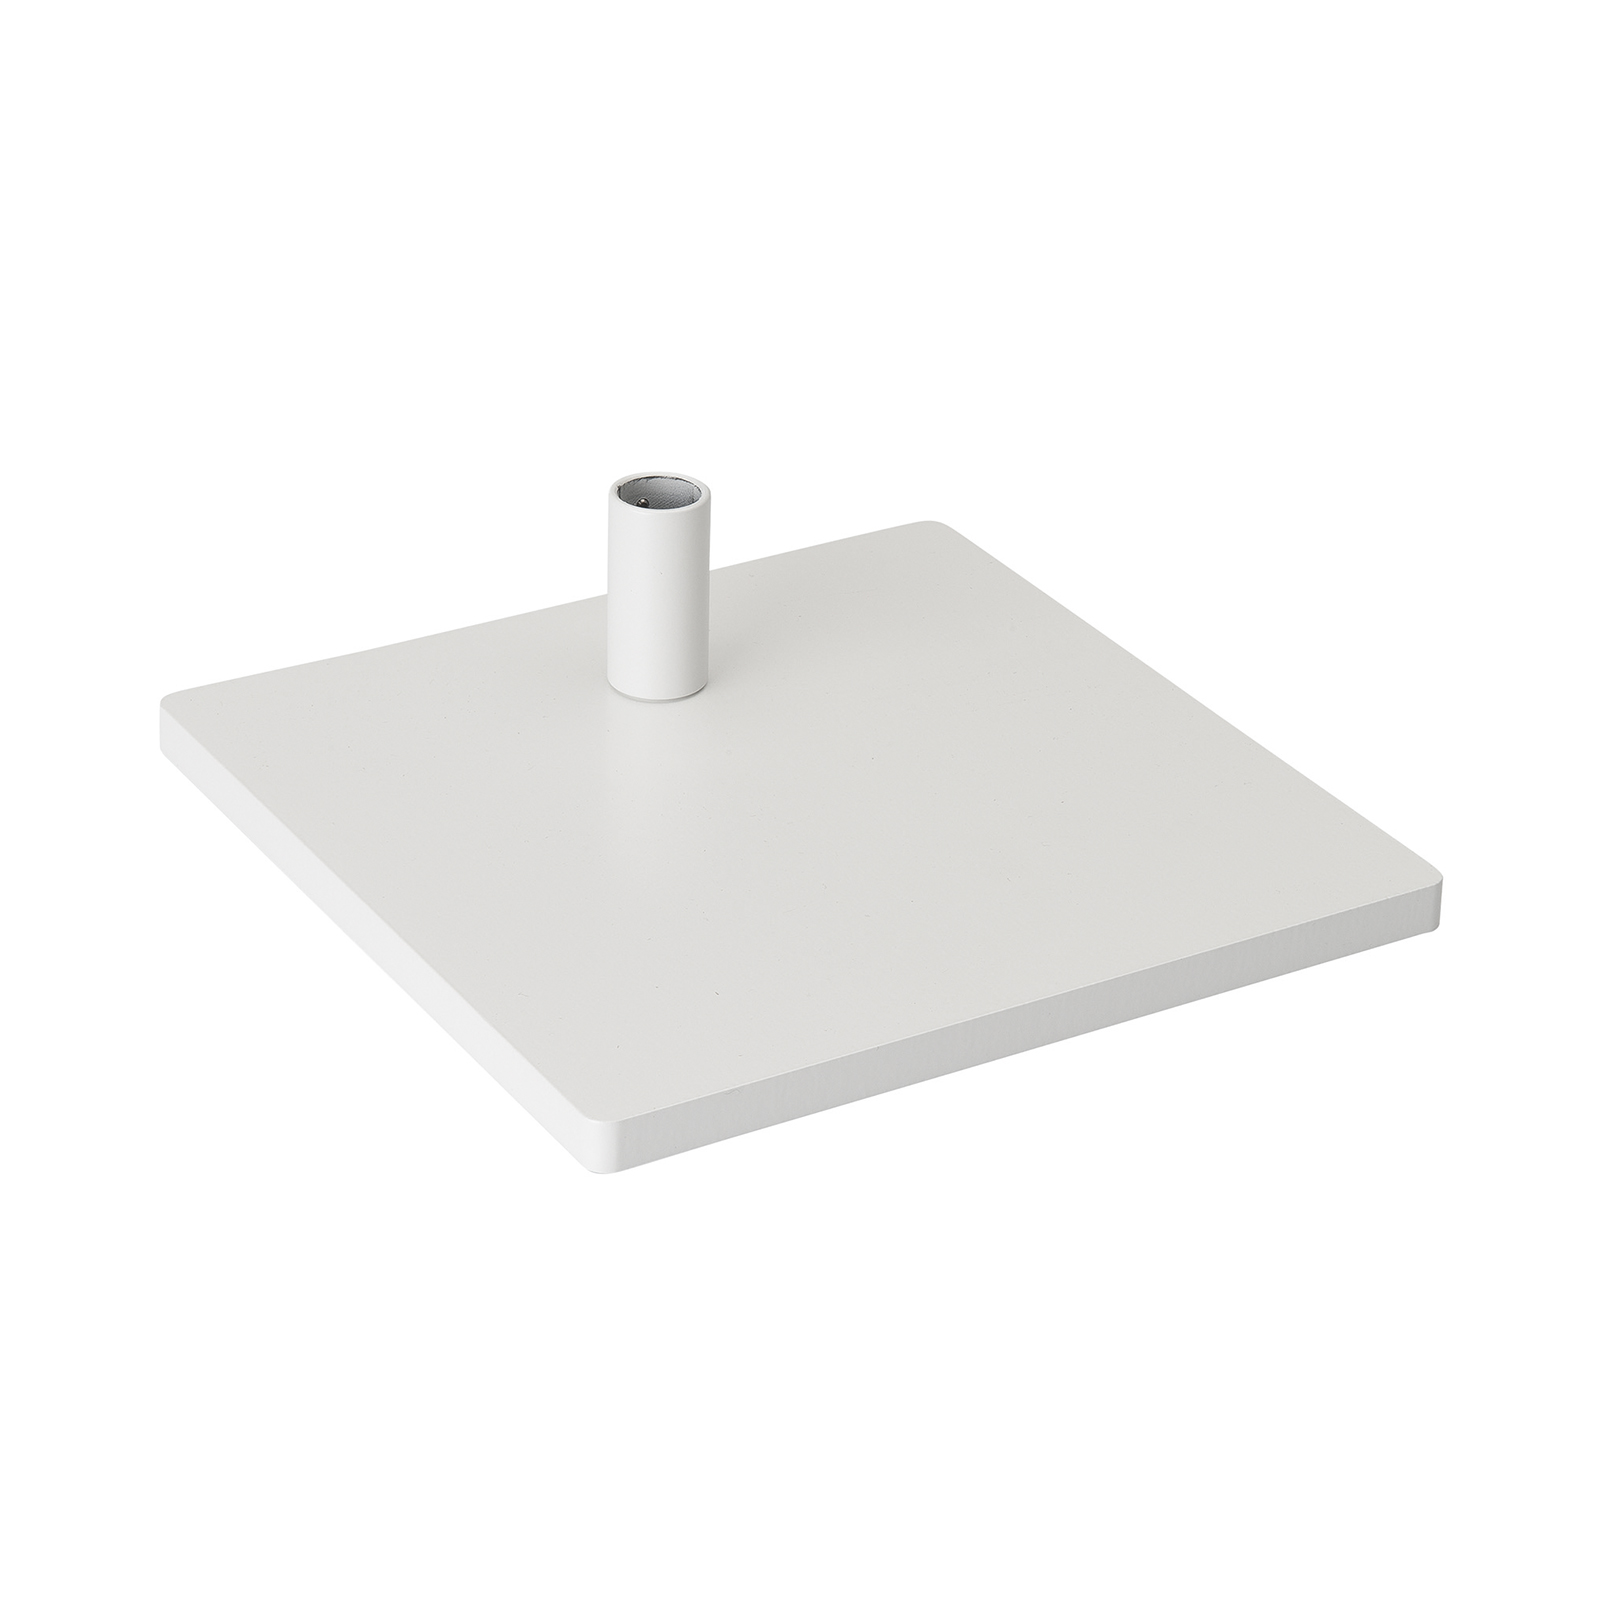 Tabletop Stand, Square, White, for Para.Mi Bench Light - 1 piece